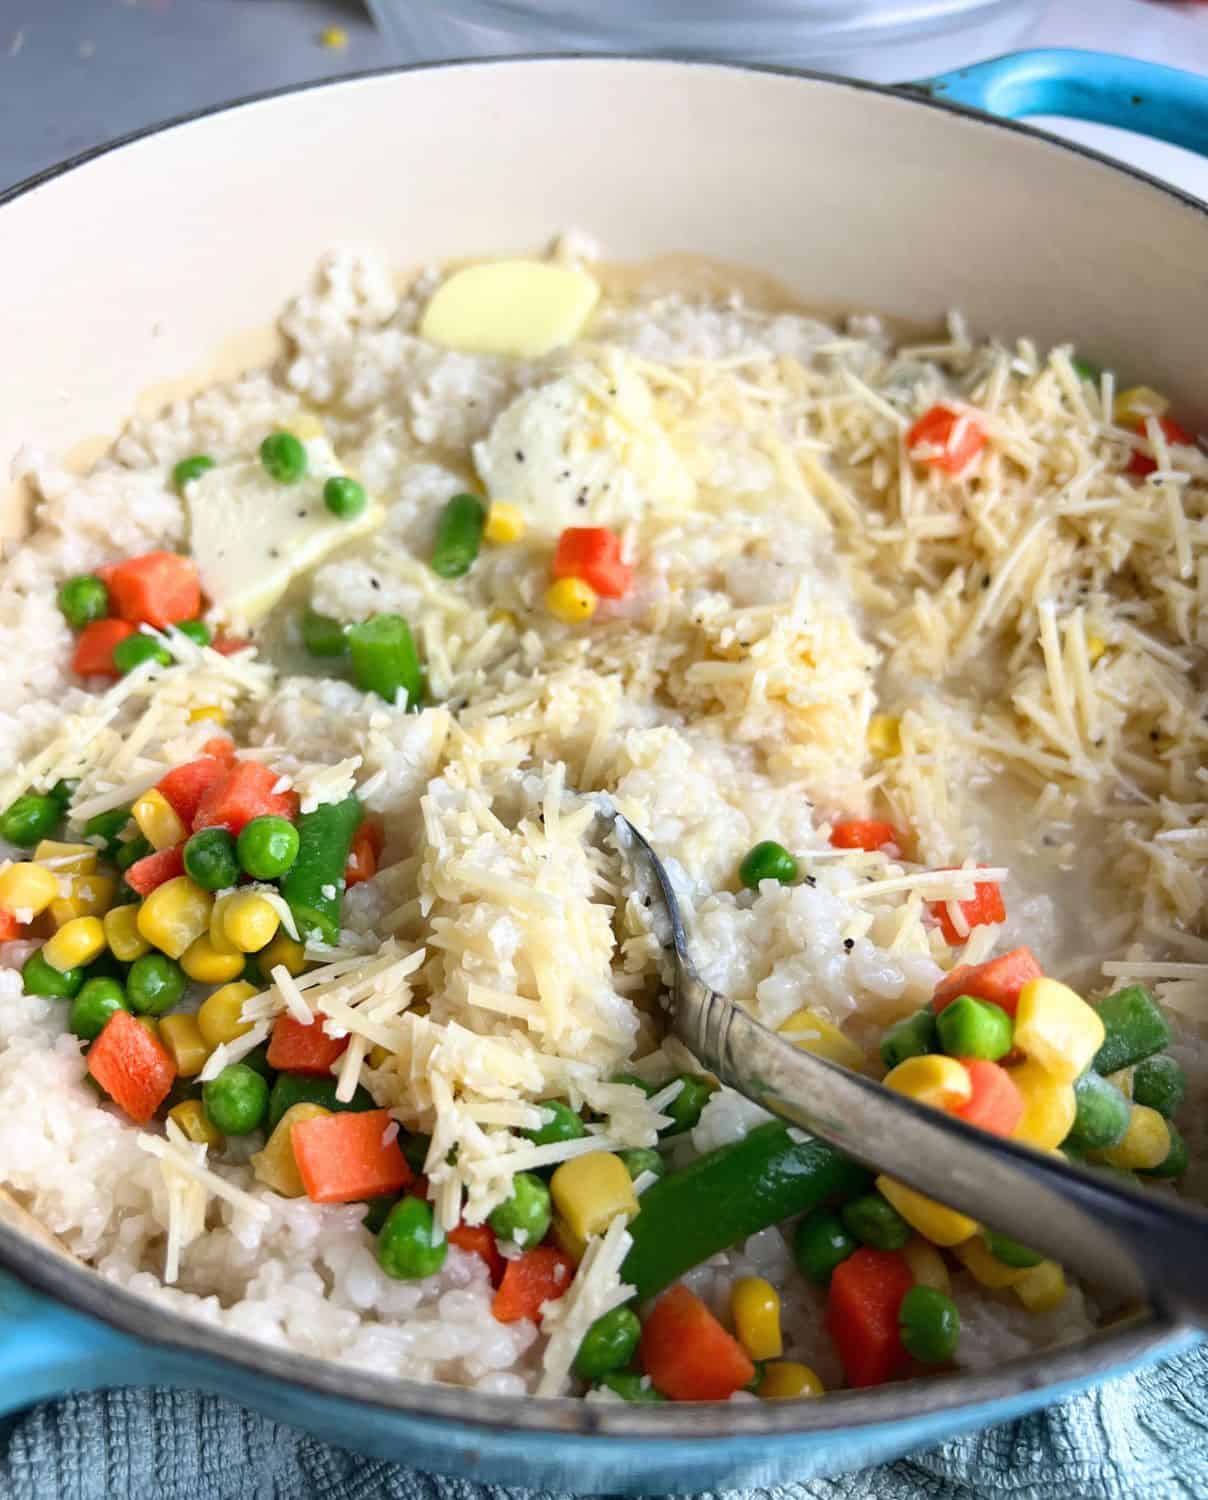 Butter, vegetables, and parmesan mixed together with the rice. 